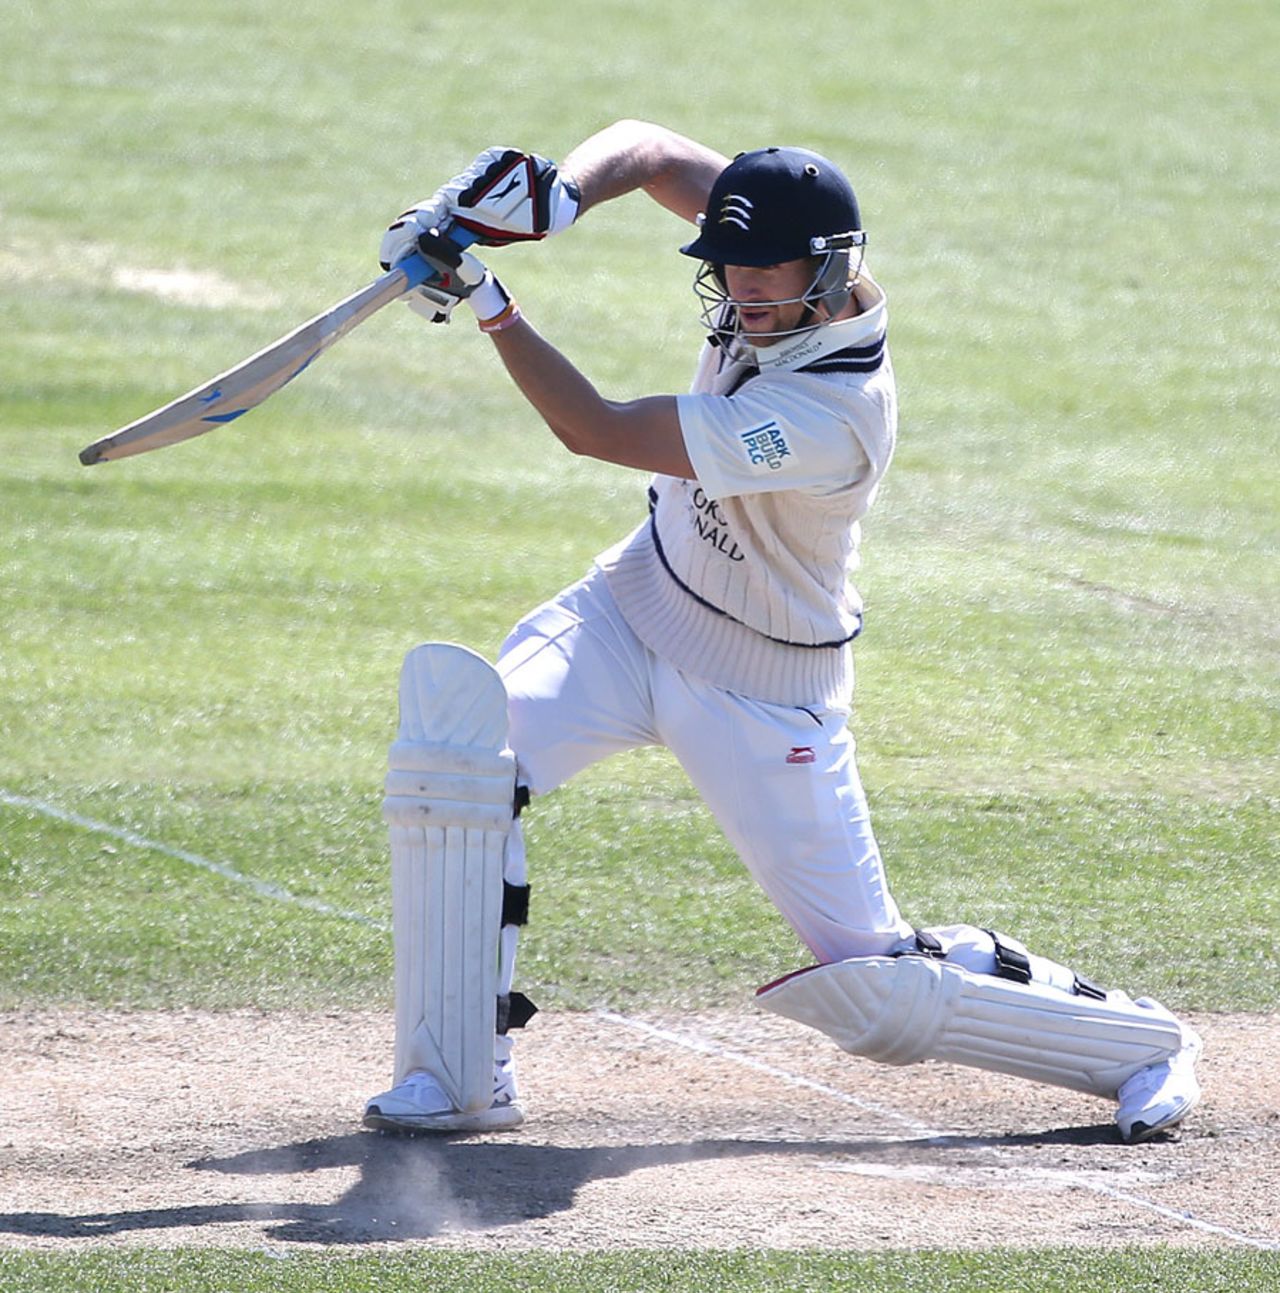 Dawid Malan was one of only two Middlesex batsmen to get a solid start, Sussex v Middlesex, County Championship Division One, Hove, 4th day, April 9, 2014